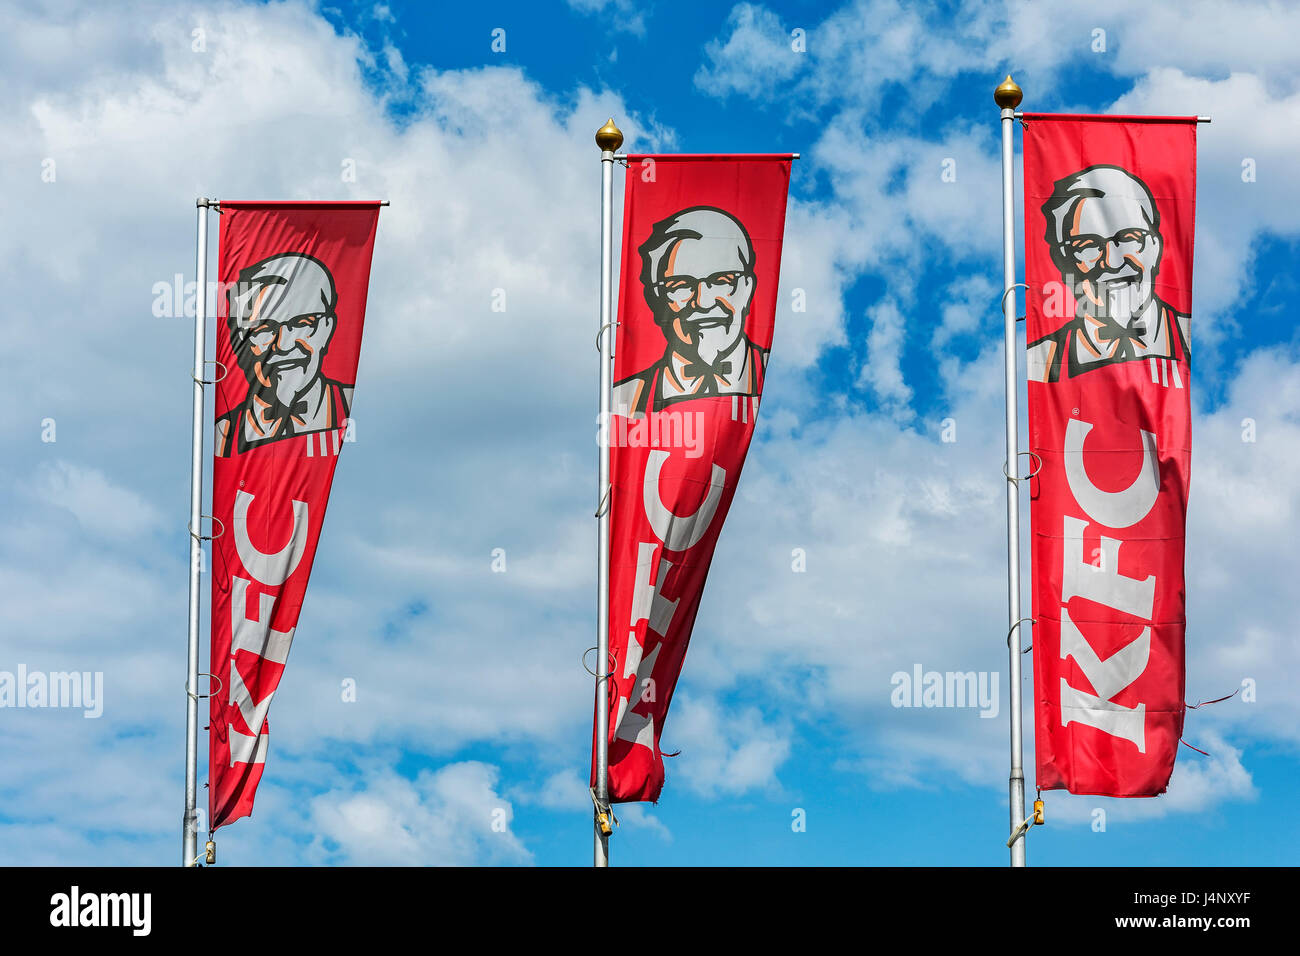 The KFC restaurant chain specializes in chicken dishes. Stock Photo